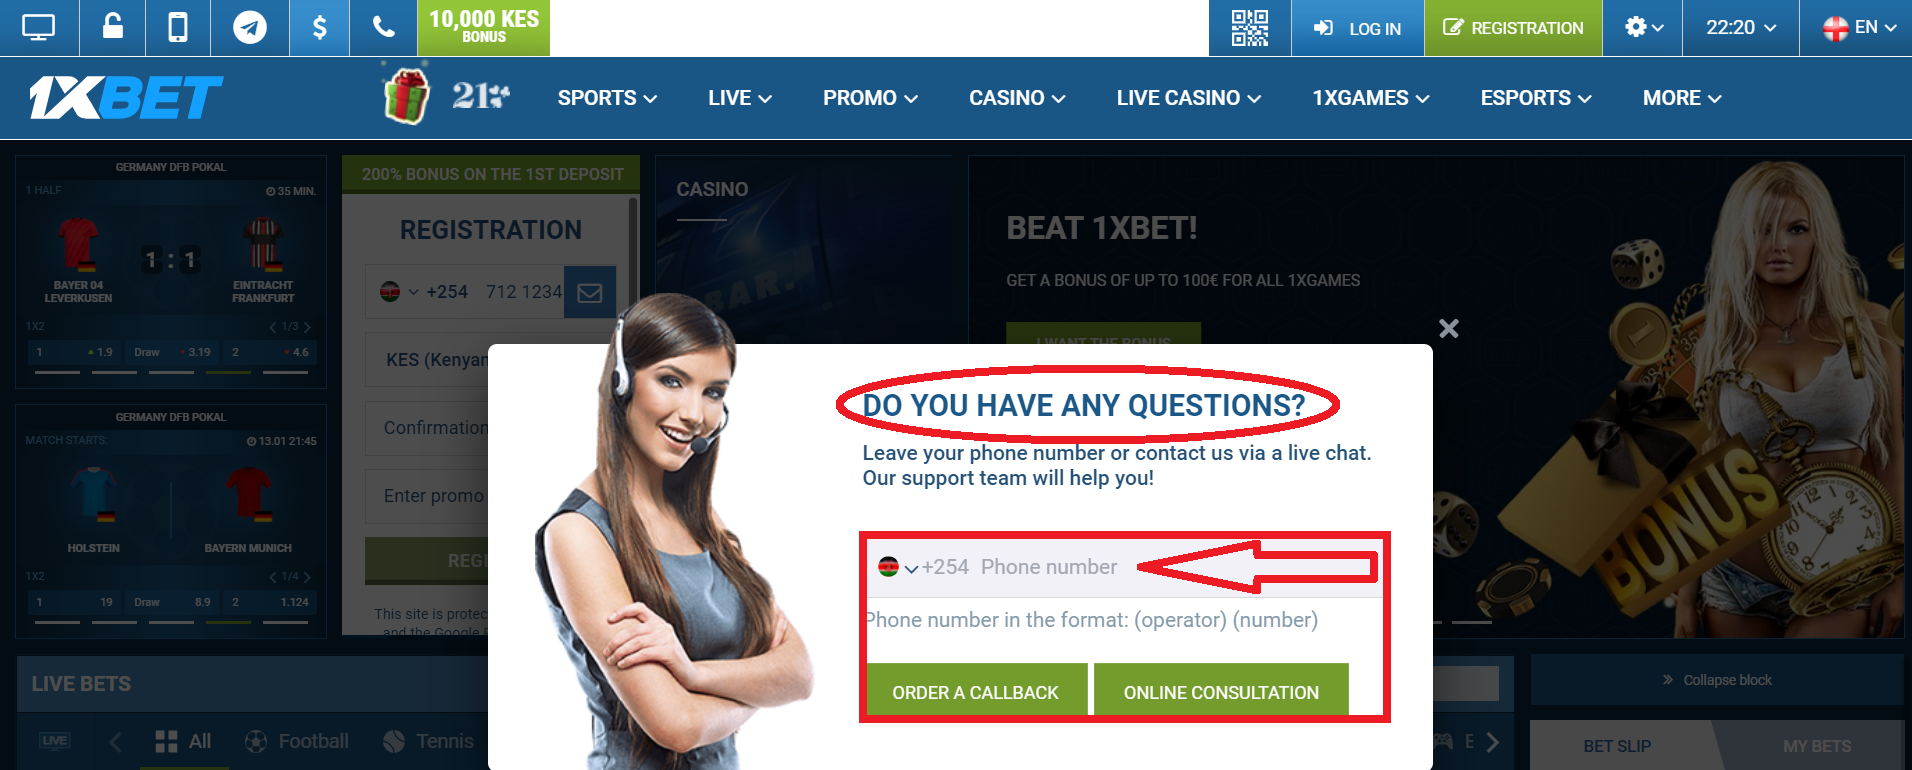 How to place bets on the 1xBet website